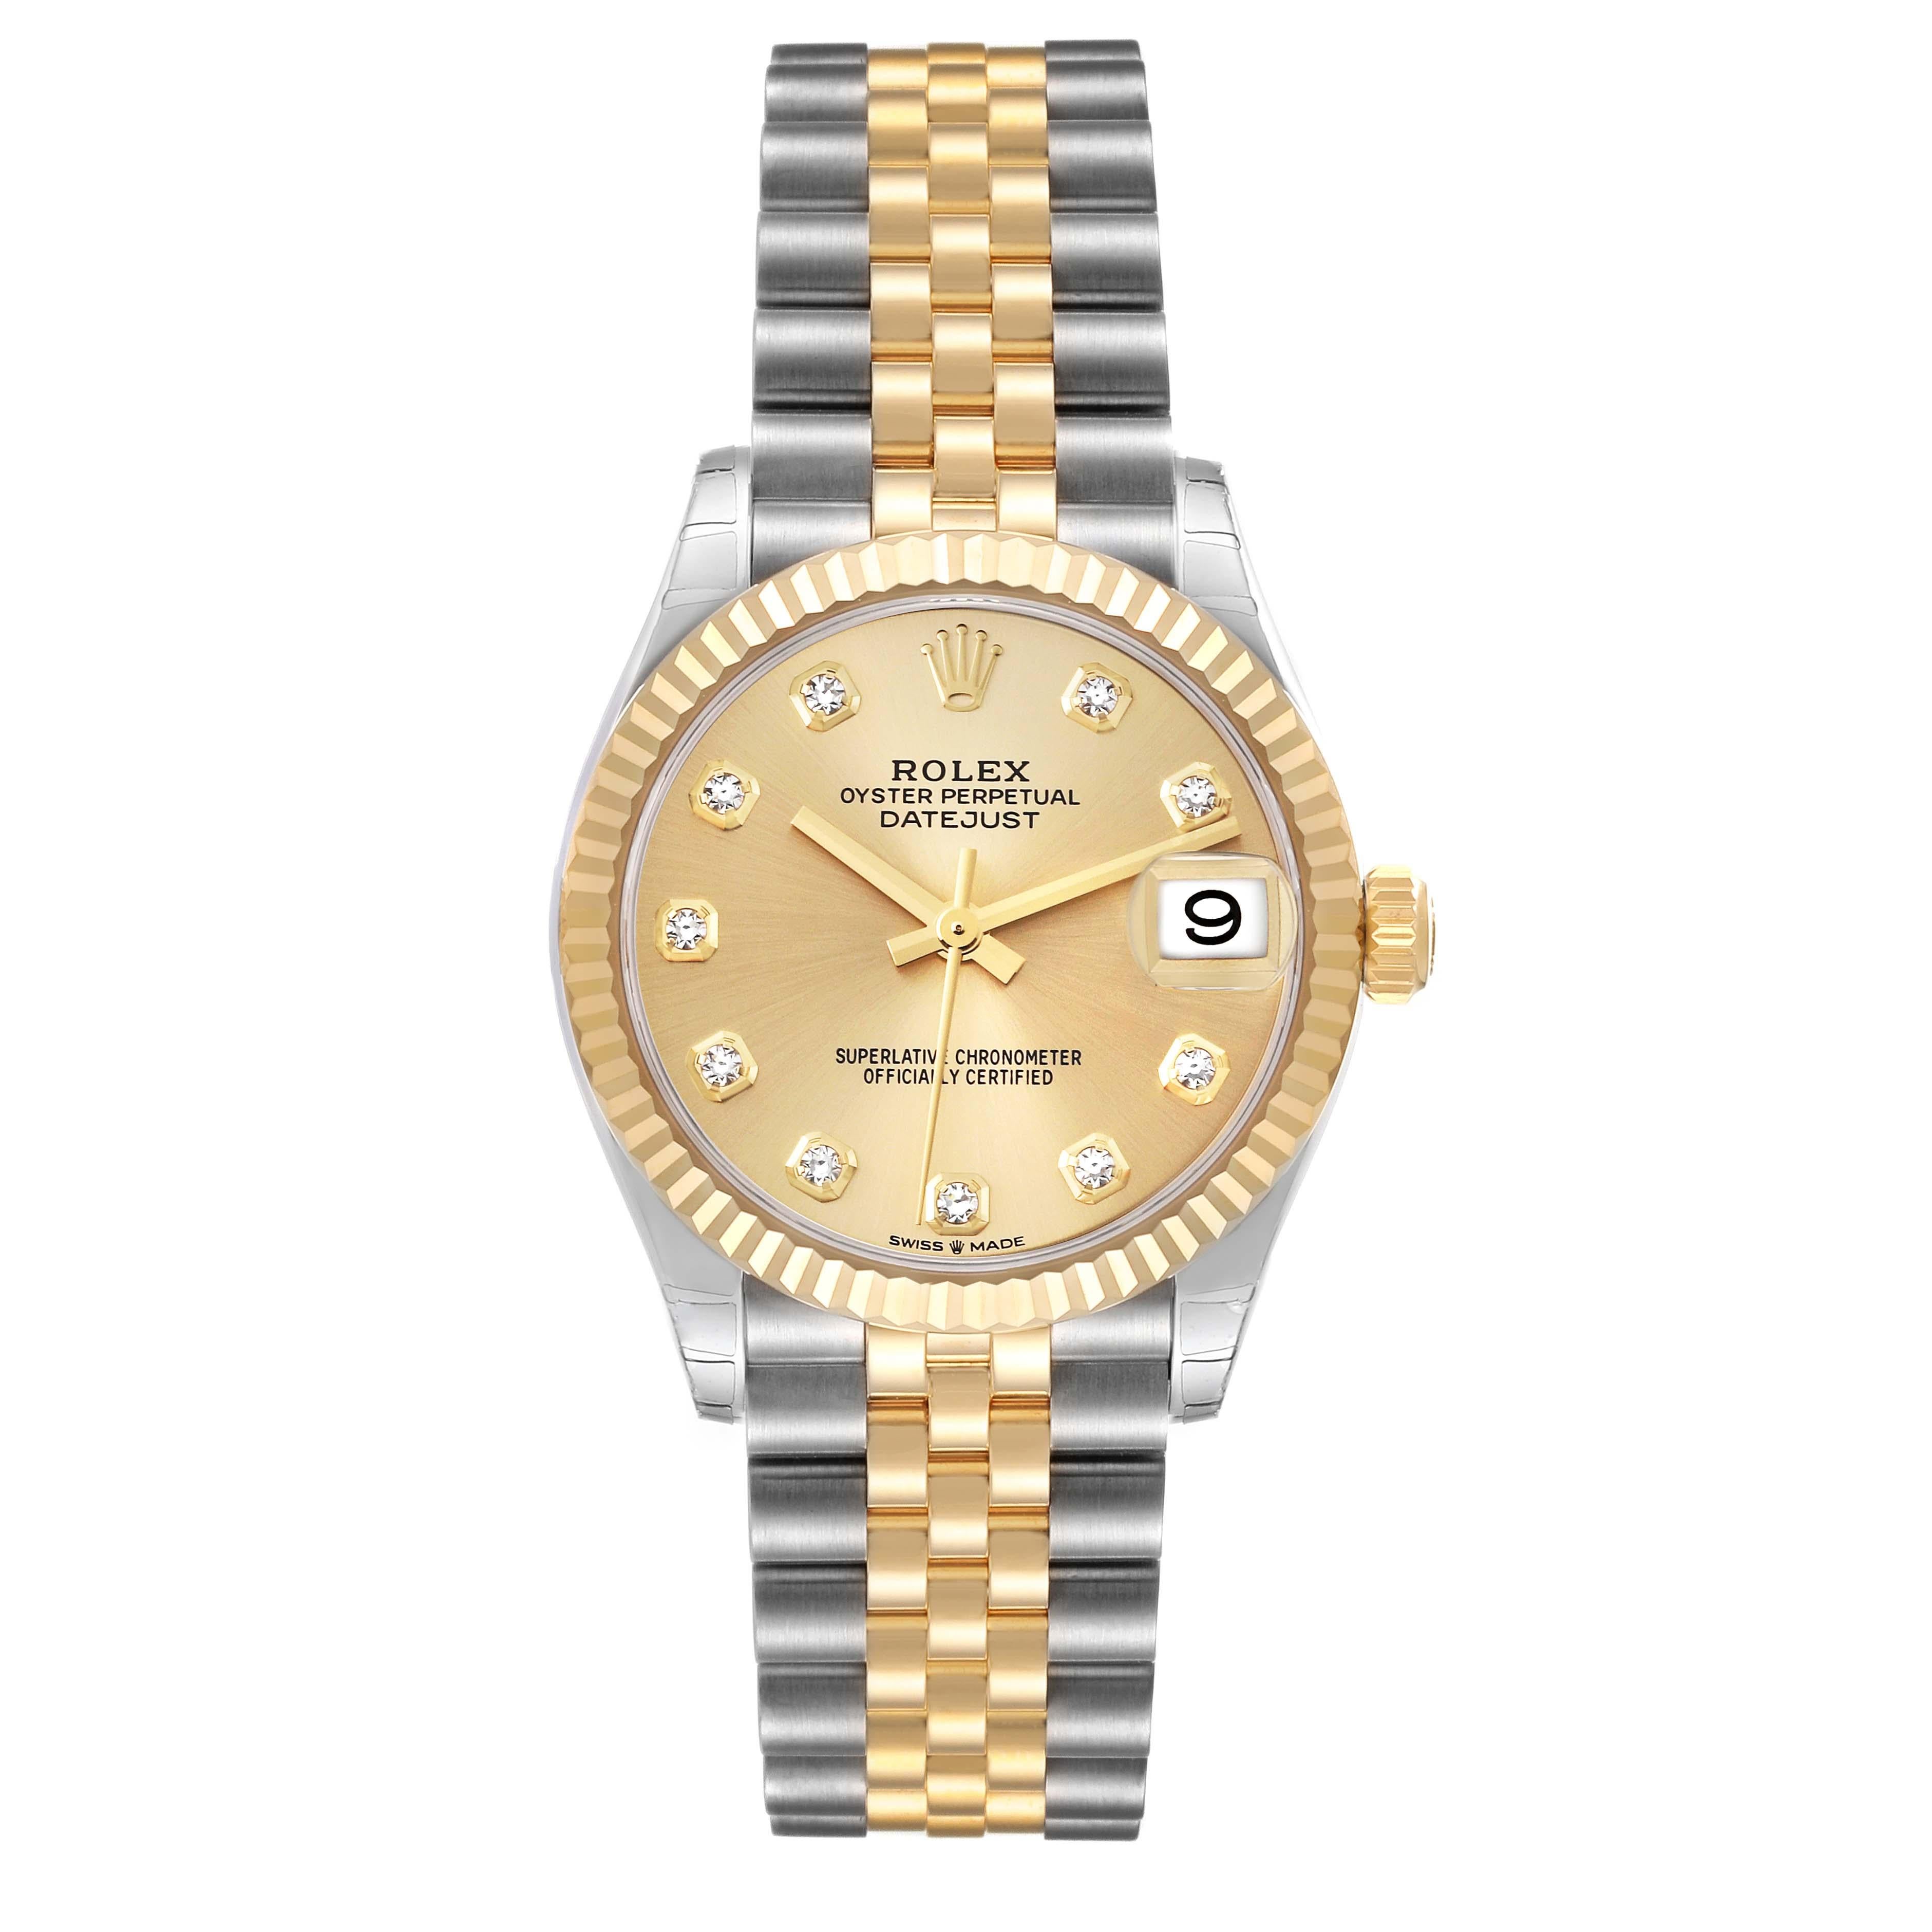 Rolex Datejust Midsize Steel Yellow Gold Diamond Dial Ladies Watch 278273 Unworn. Officially certified chronometer automatic self-winding movement. Stainless steel oyster case 31.0 mm in diameter. Rolex logo on 18k yellow gold crown. 18k yellow gold